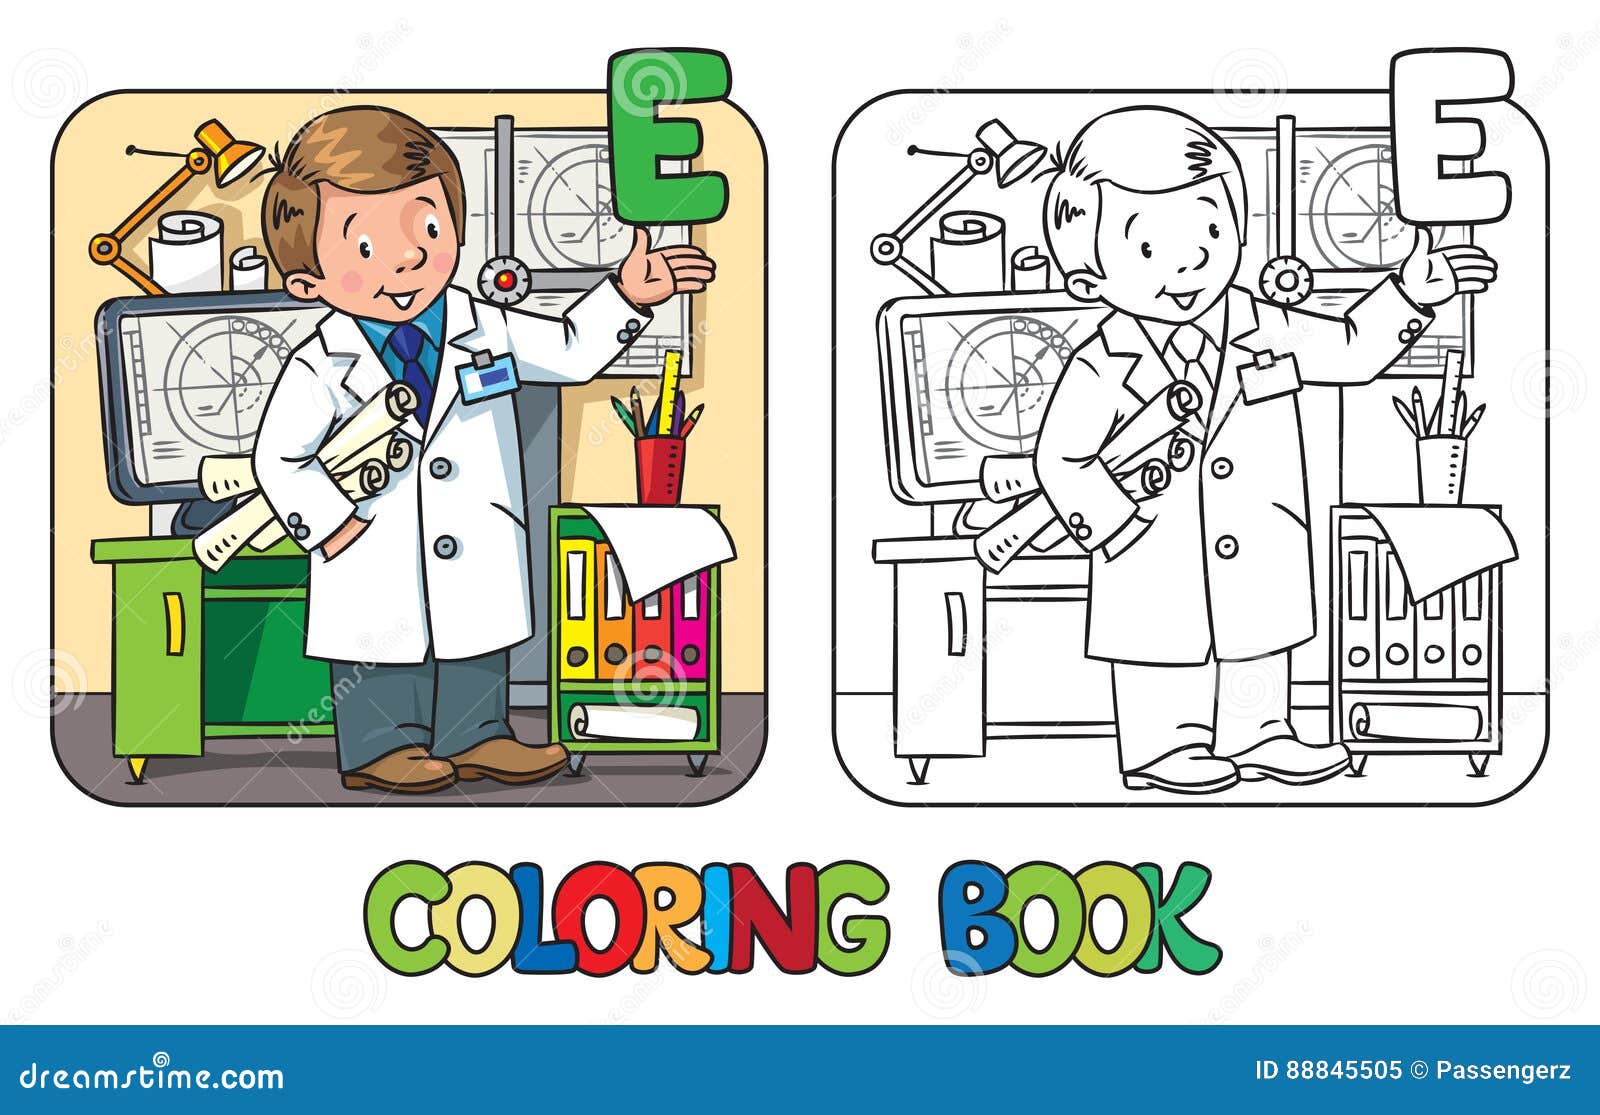 engineer coloring book. profession abc series